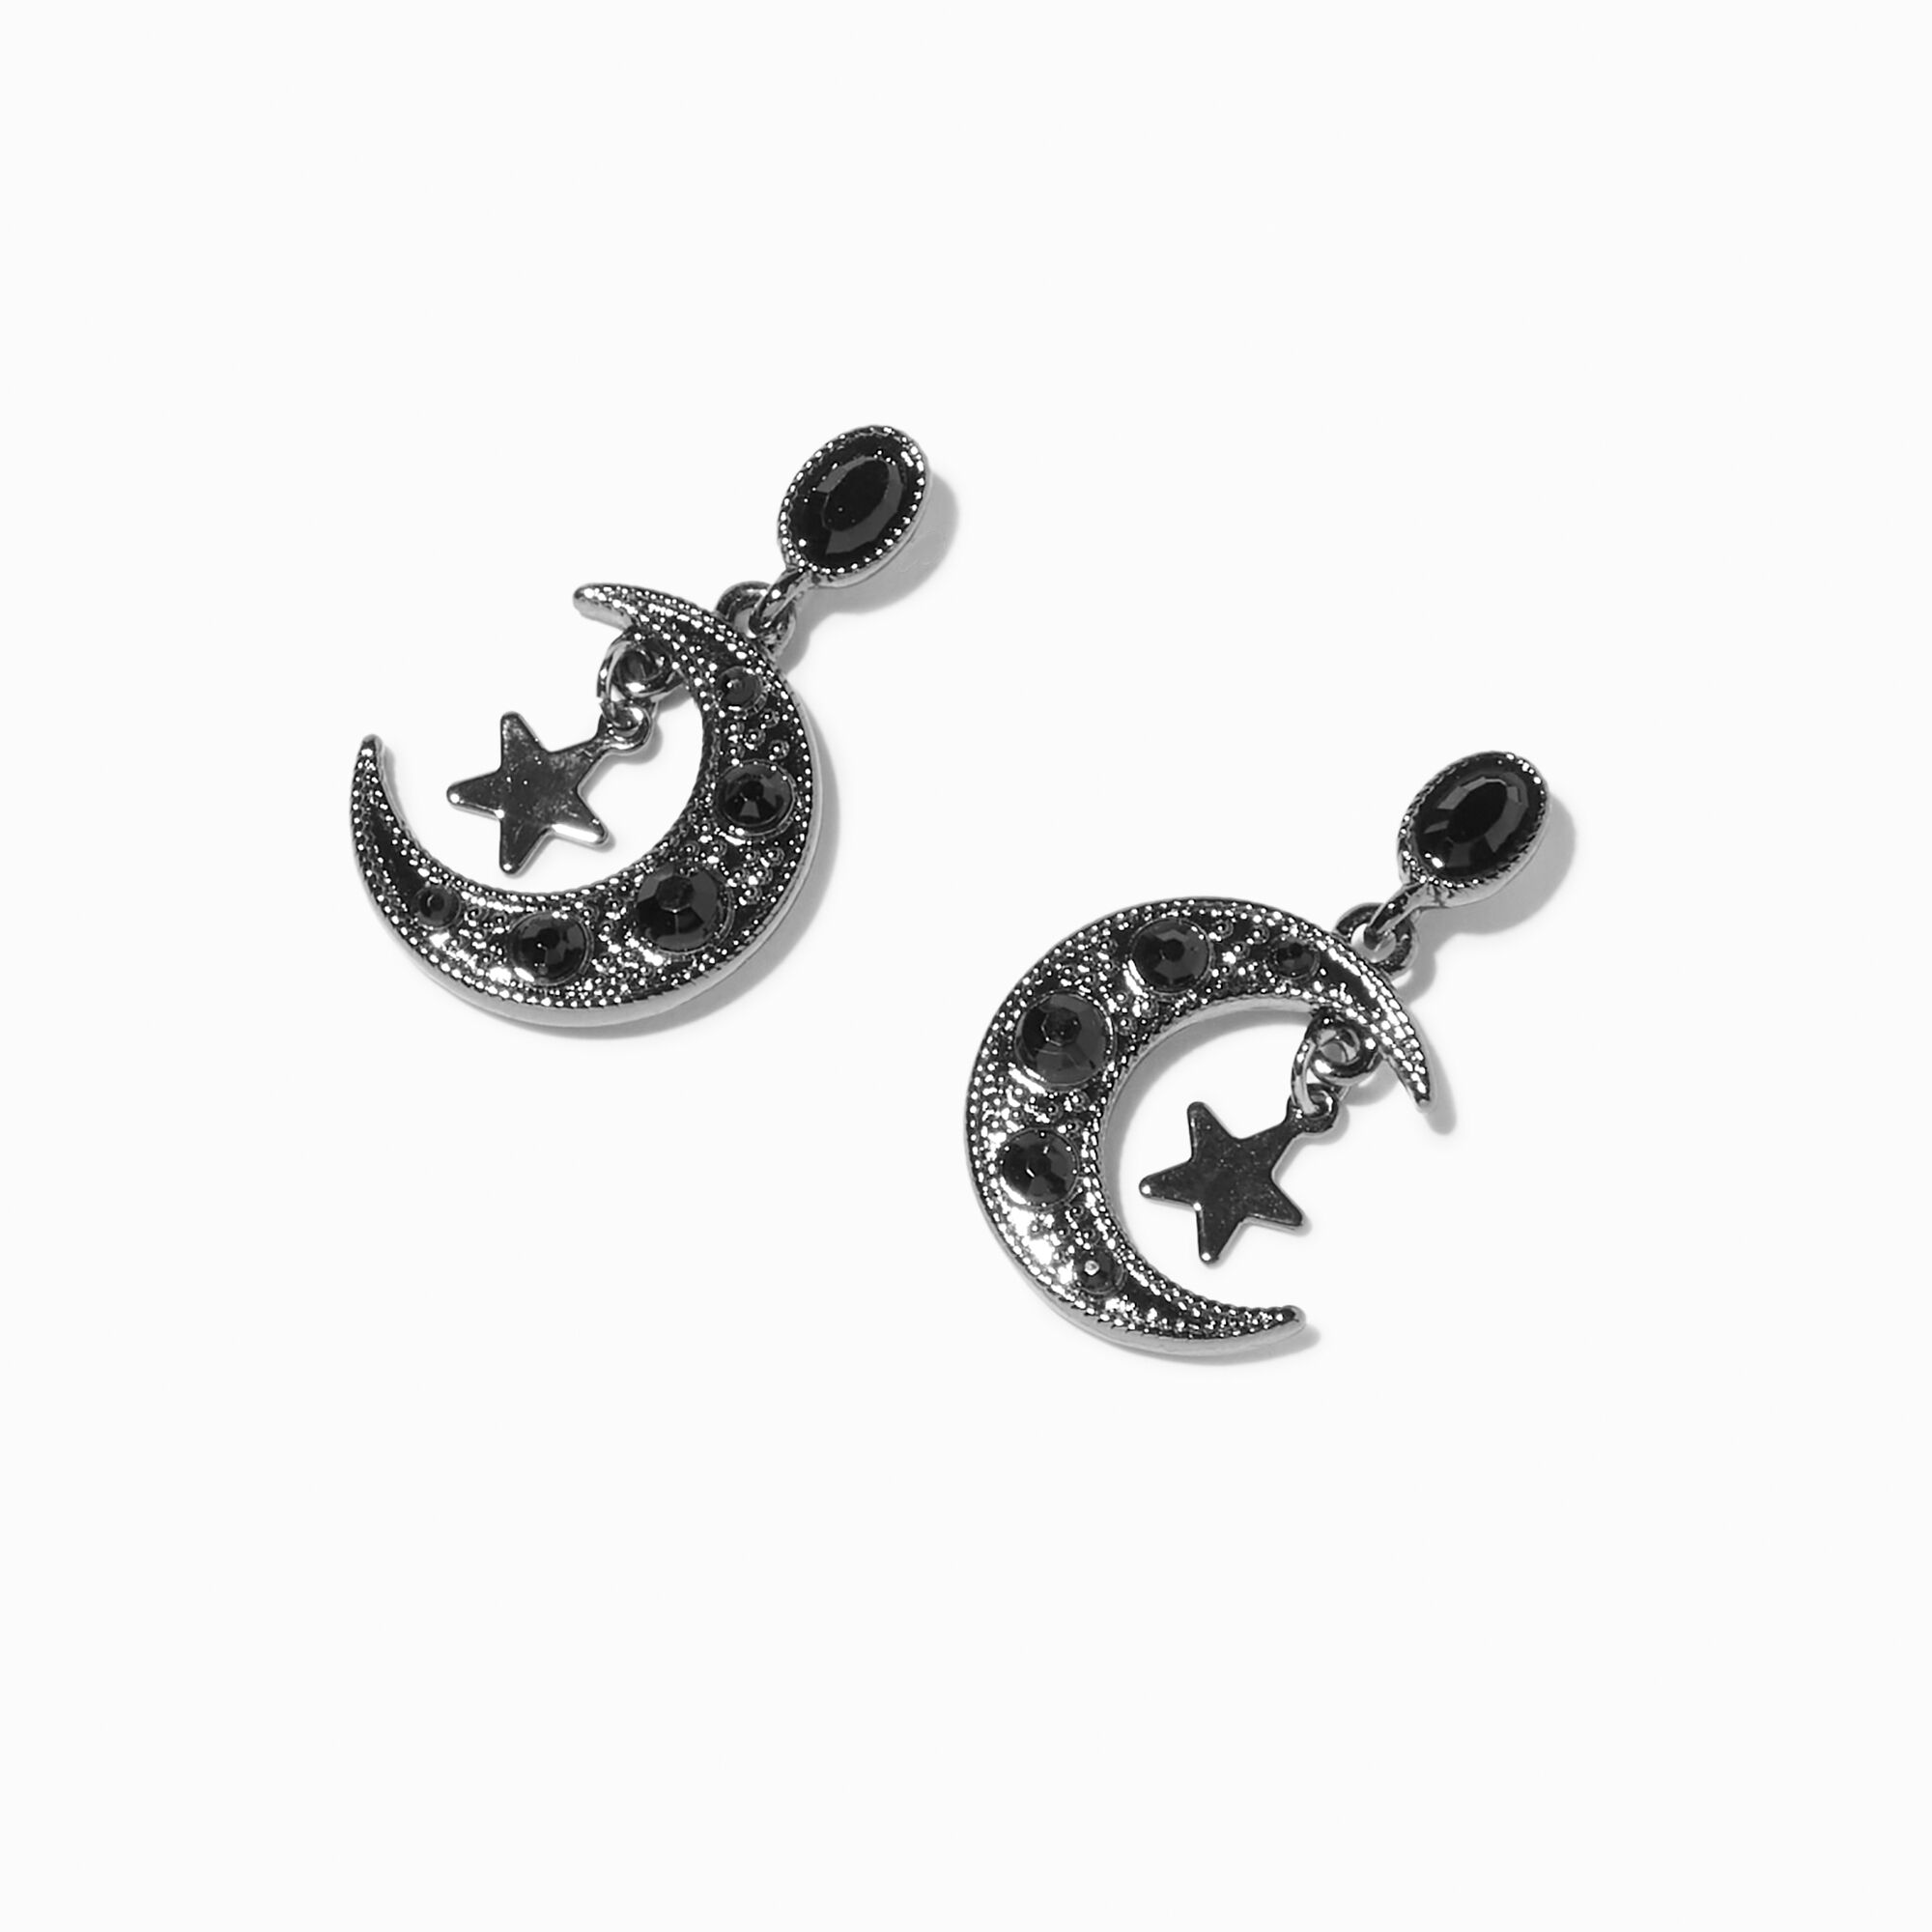 View Claires 1 Crescent Moon Star Drop Earrings Black information